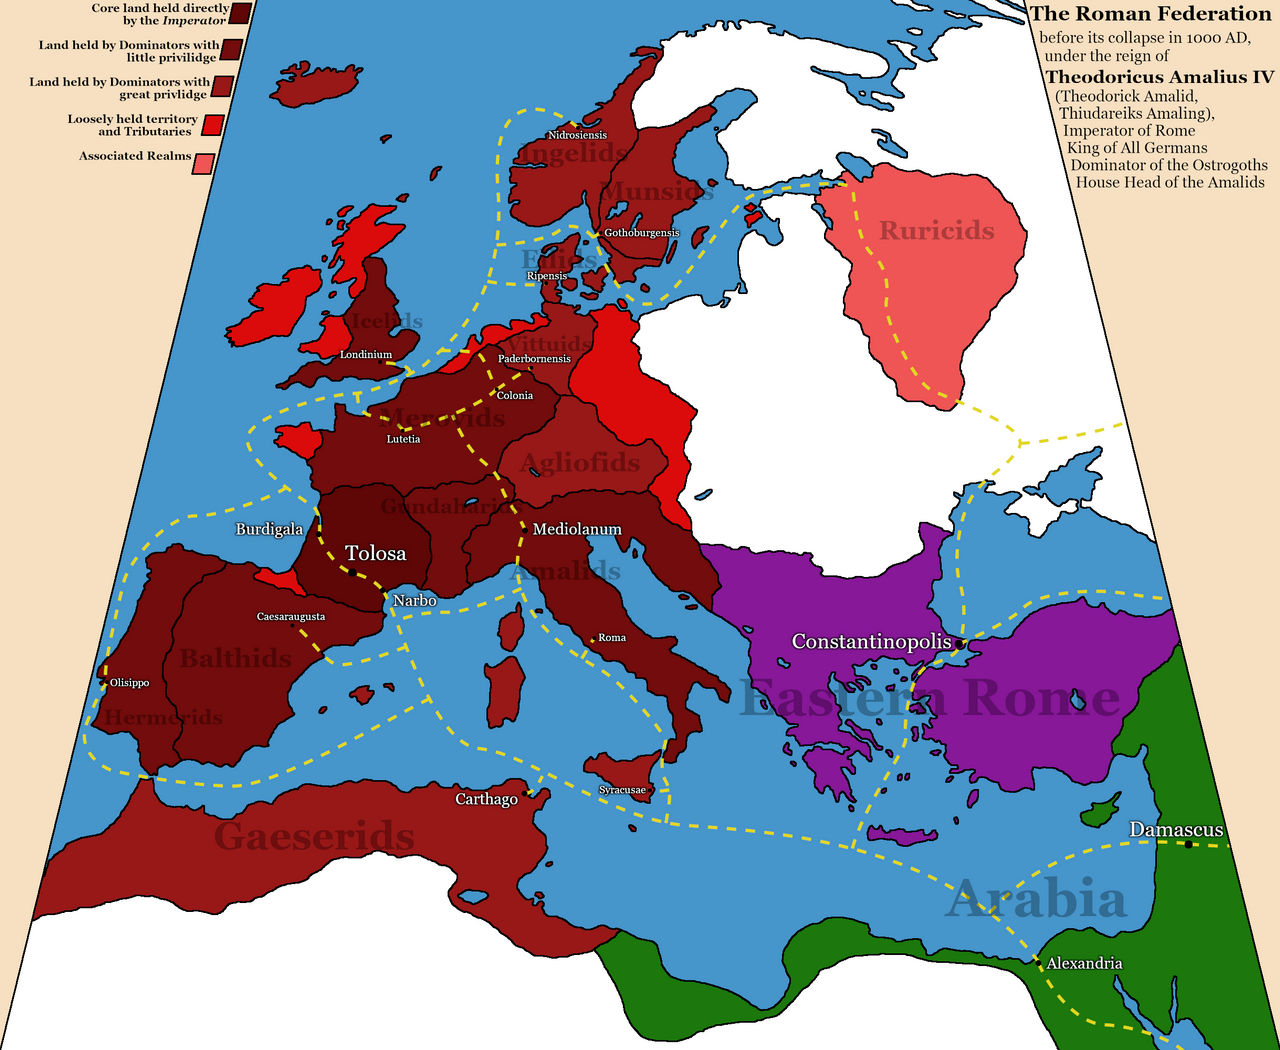 the_roman_federation_and_the_kingdom_of_all_german_by_spiritswriter123_df7yltn-fullview.jpg